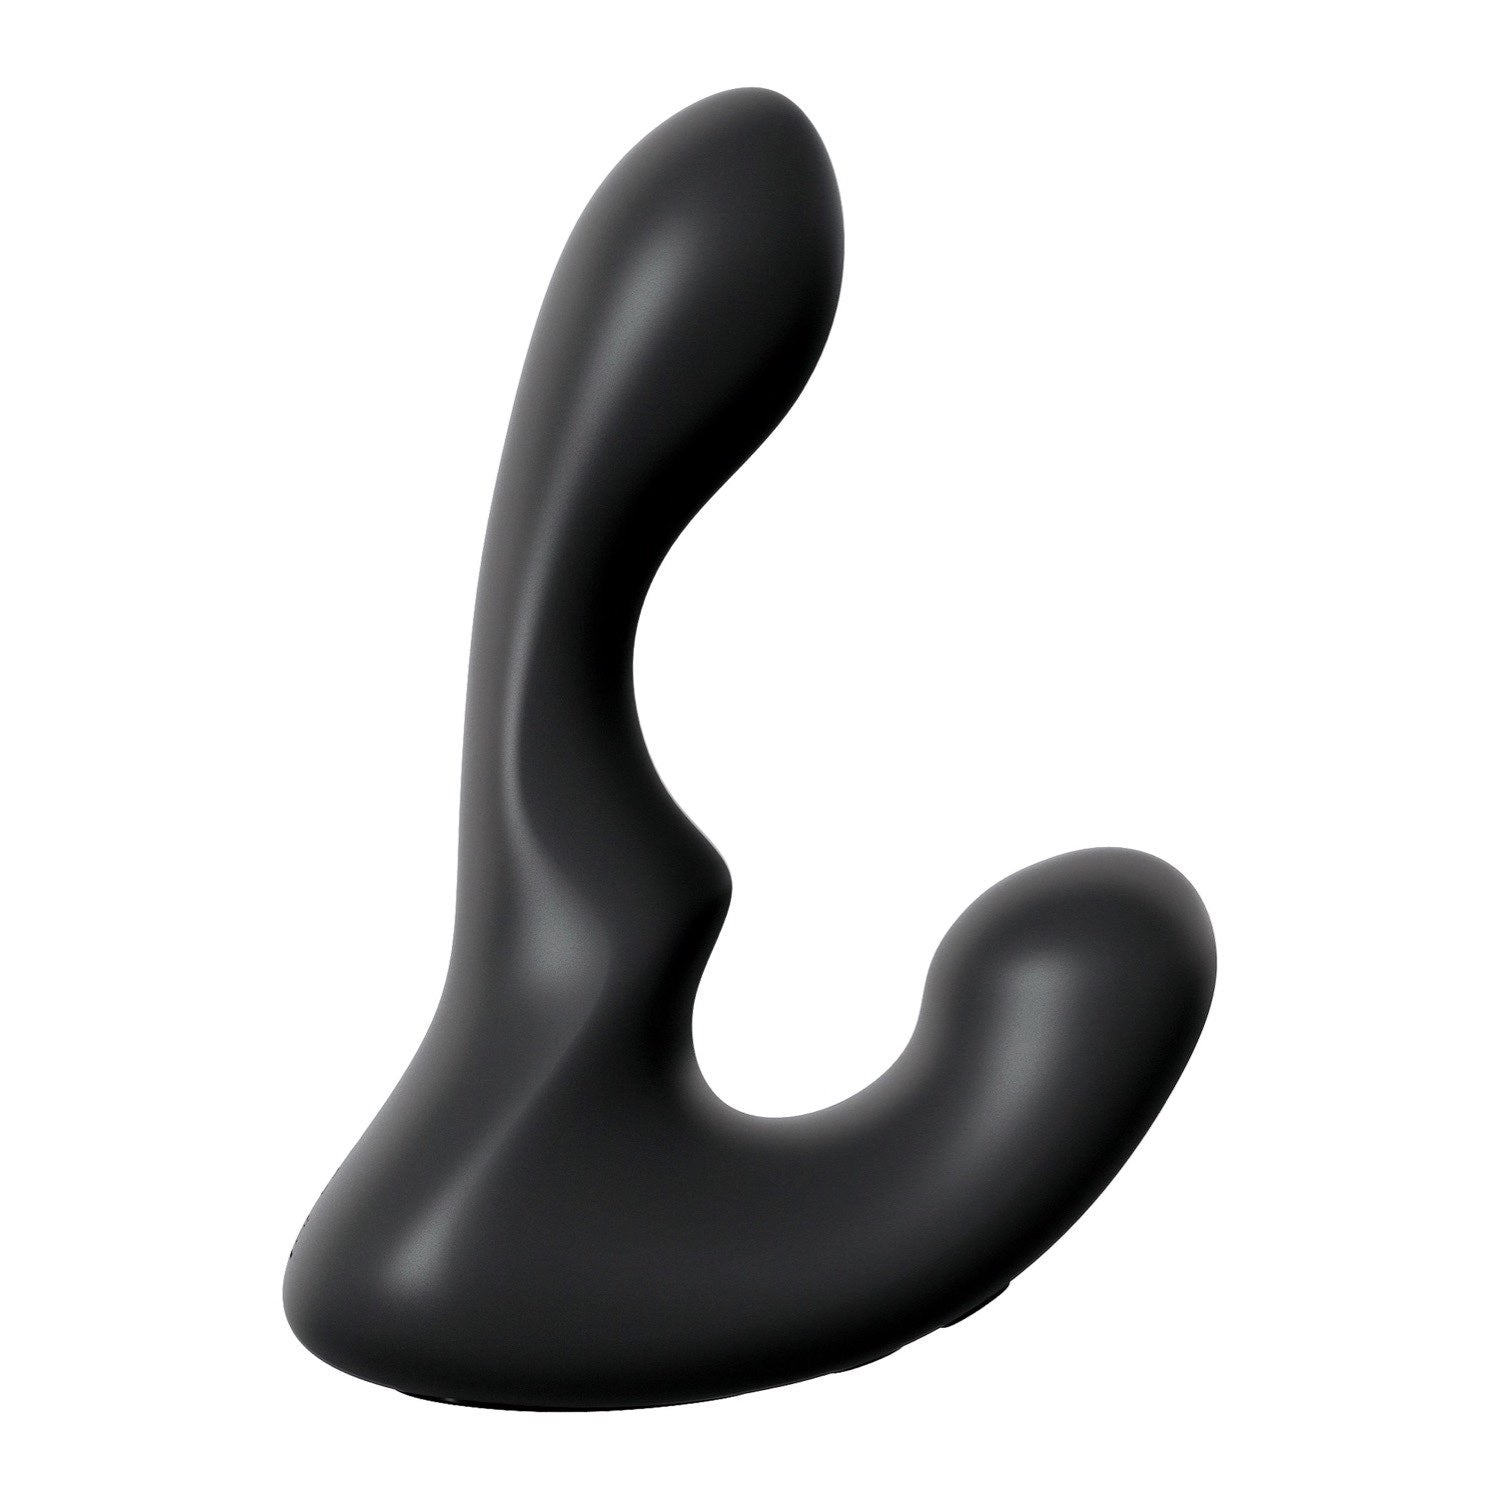 Anal Fantasy Elite Collection Ultimate P-Spot Milker - Black USB Rechargeable Vibrating Prostate Massager by Pipedream